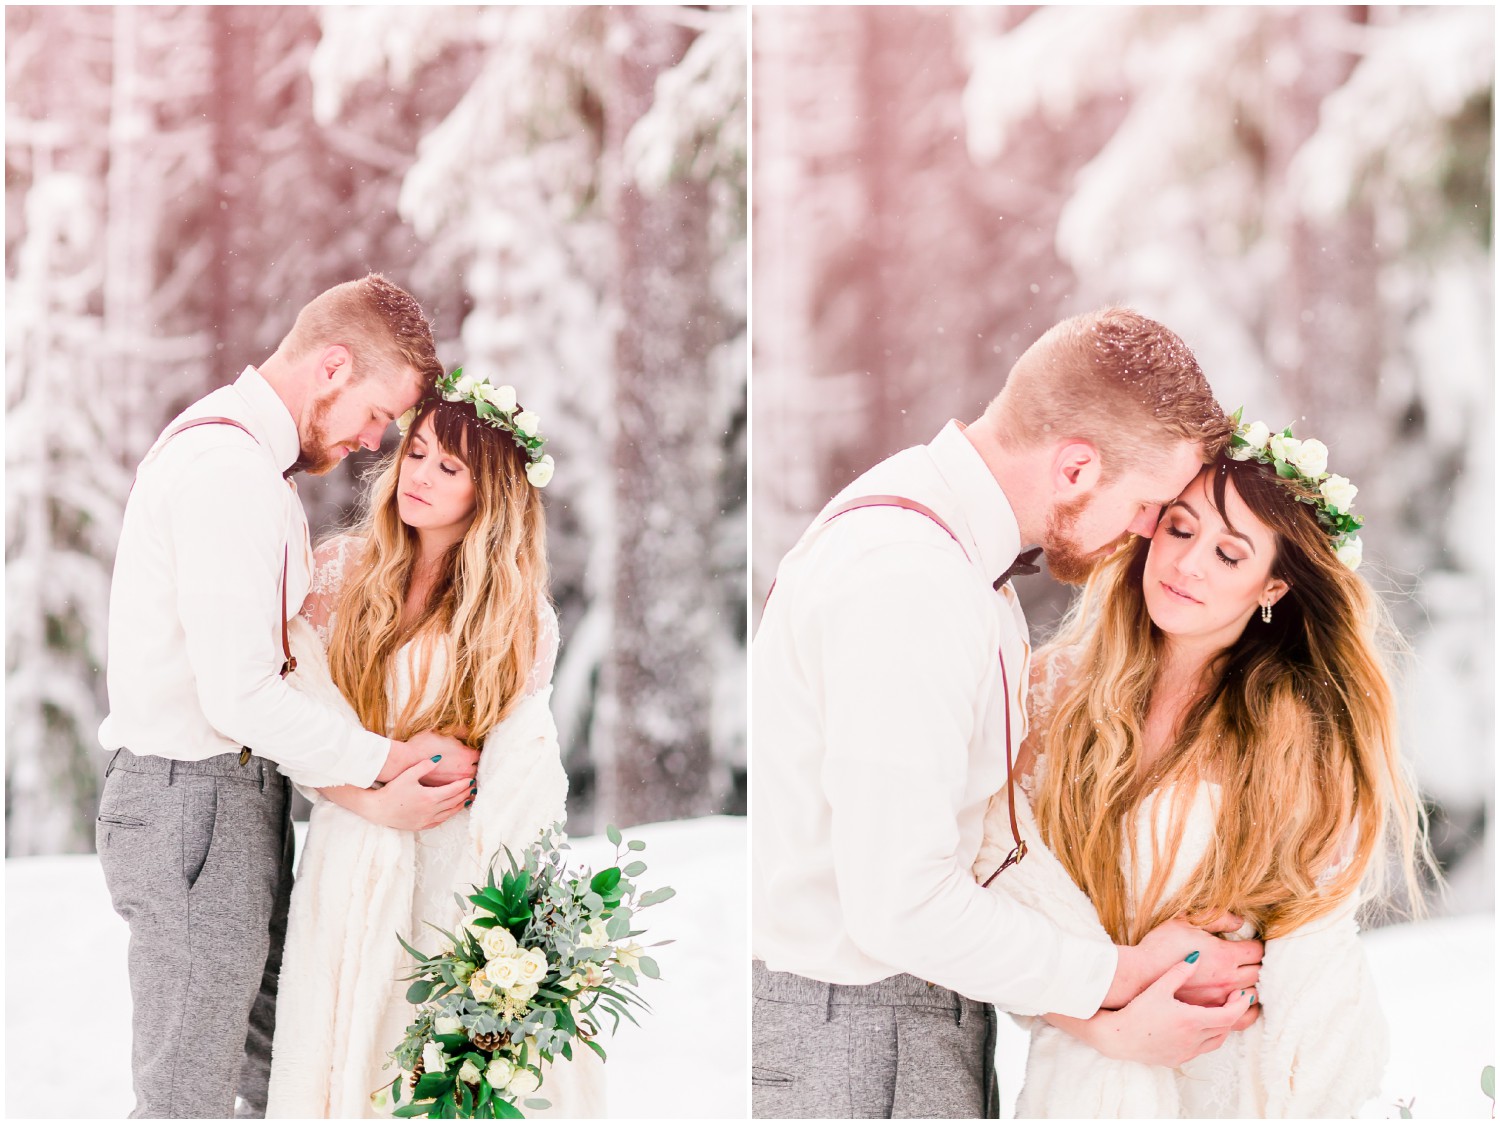 A Snowy Winter Elopement at Trillium Lake